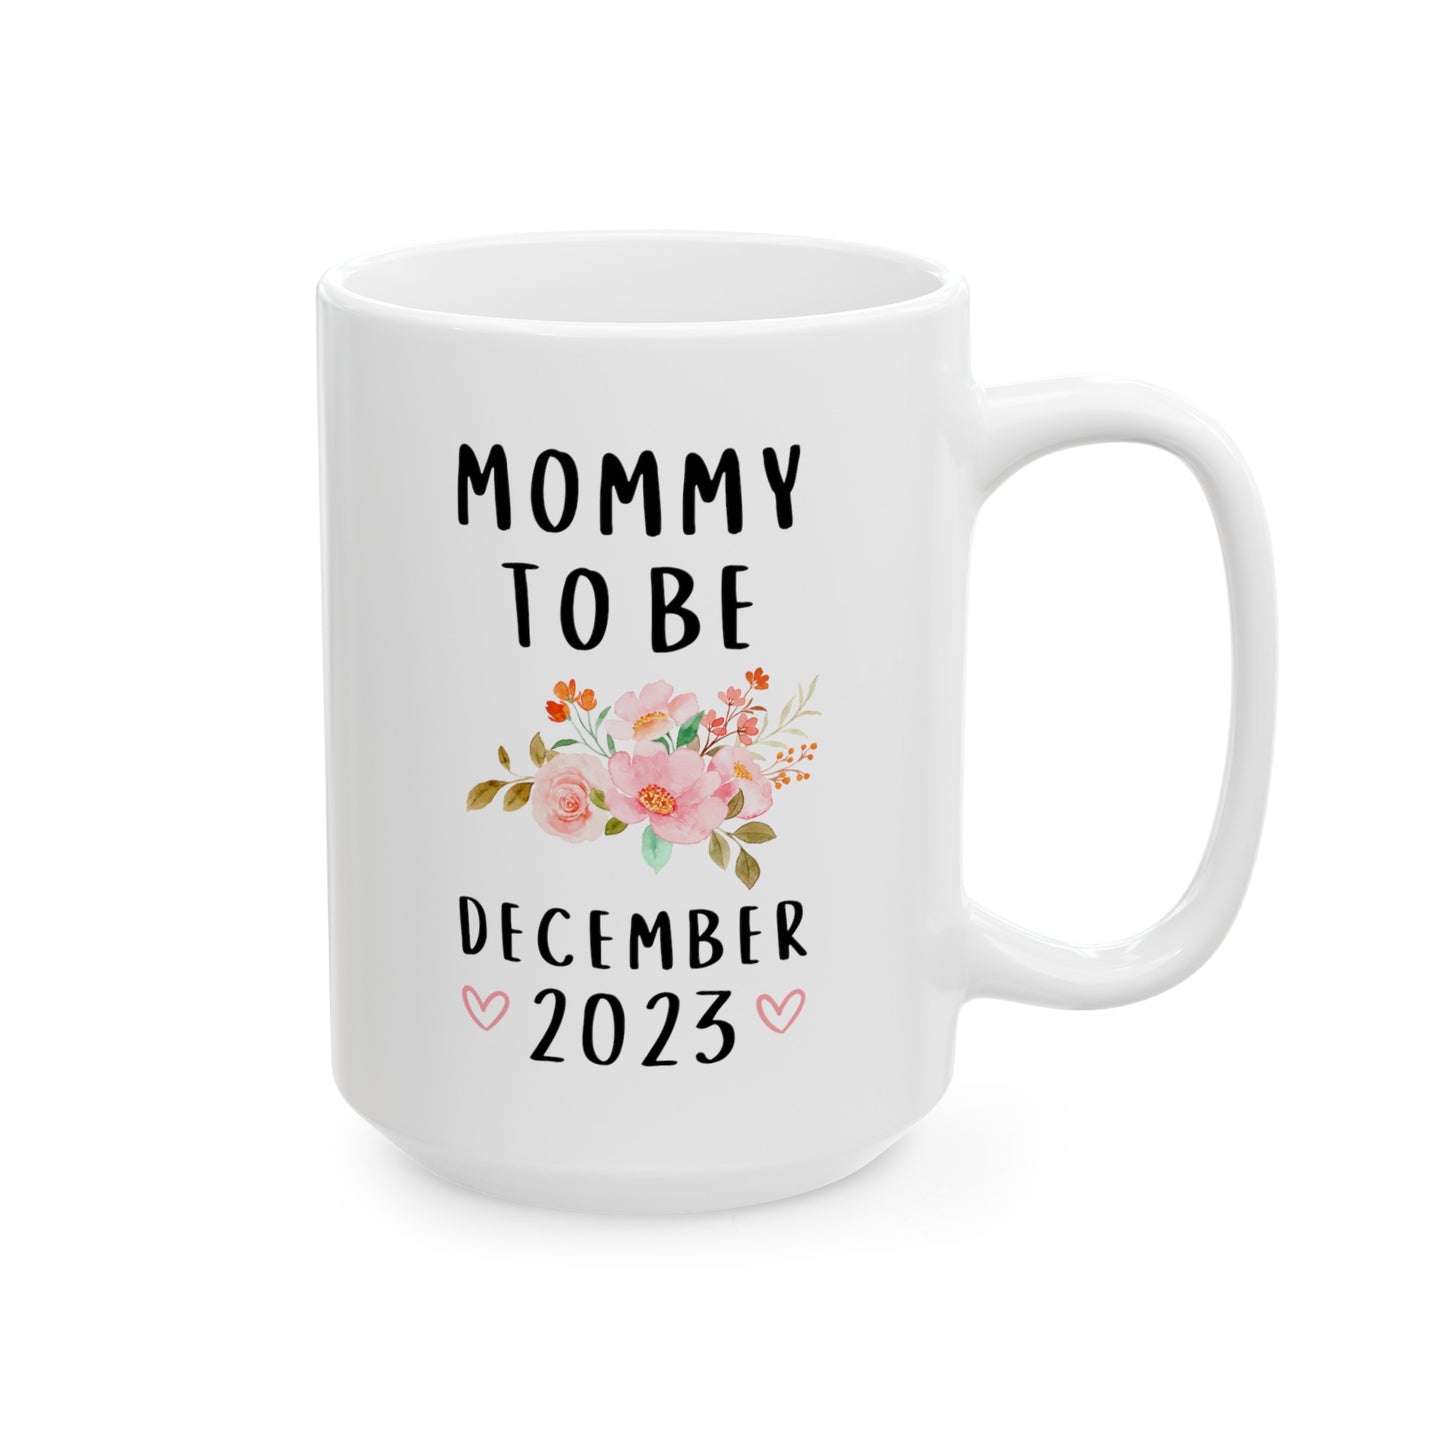 Mommy to Be 15oz white funny large coffee mug gift for future mother new mom pregnancy announcement due date floral mum personalized custom waveywares wavey wares wavywares wavy wares